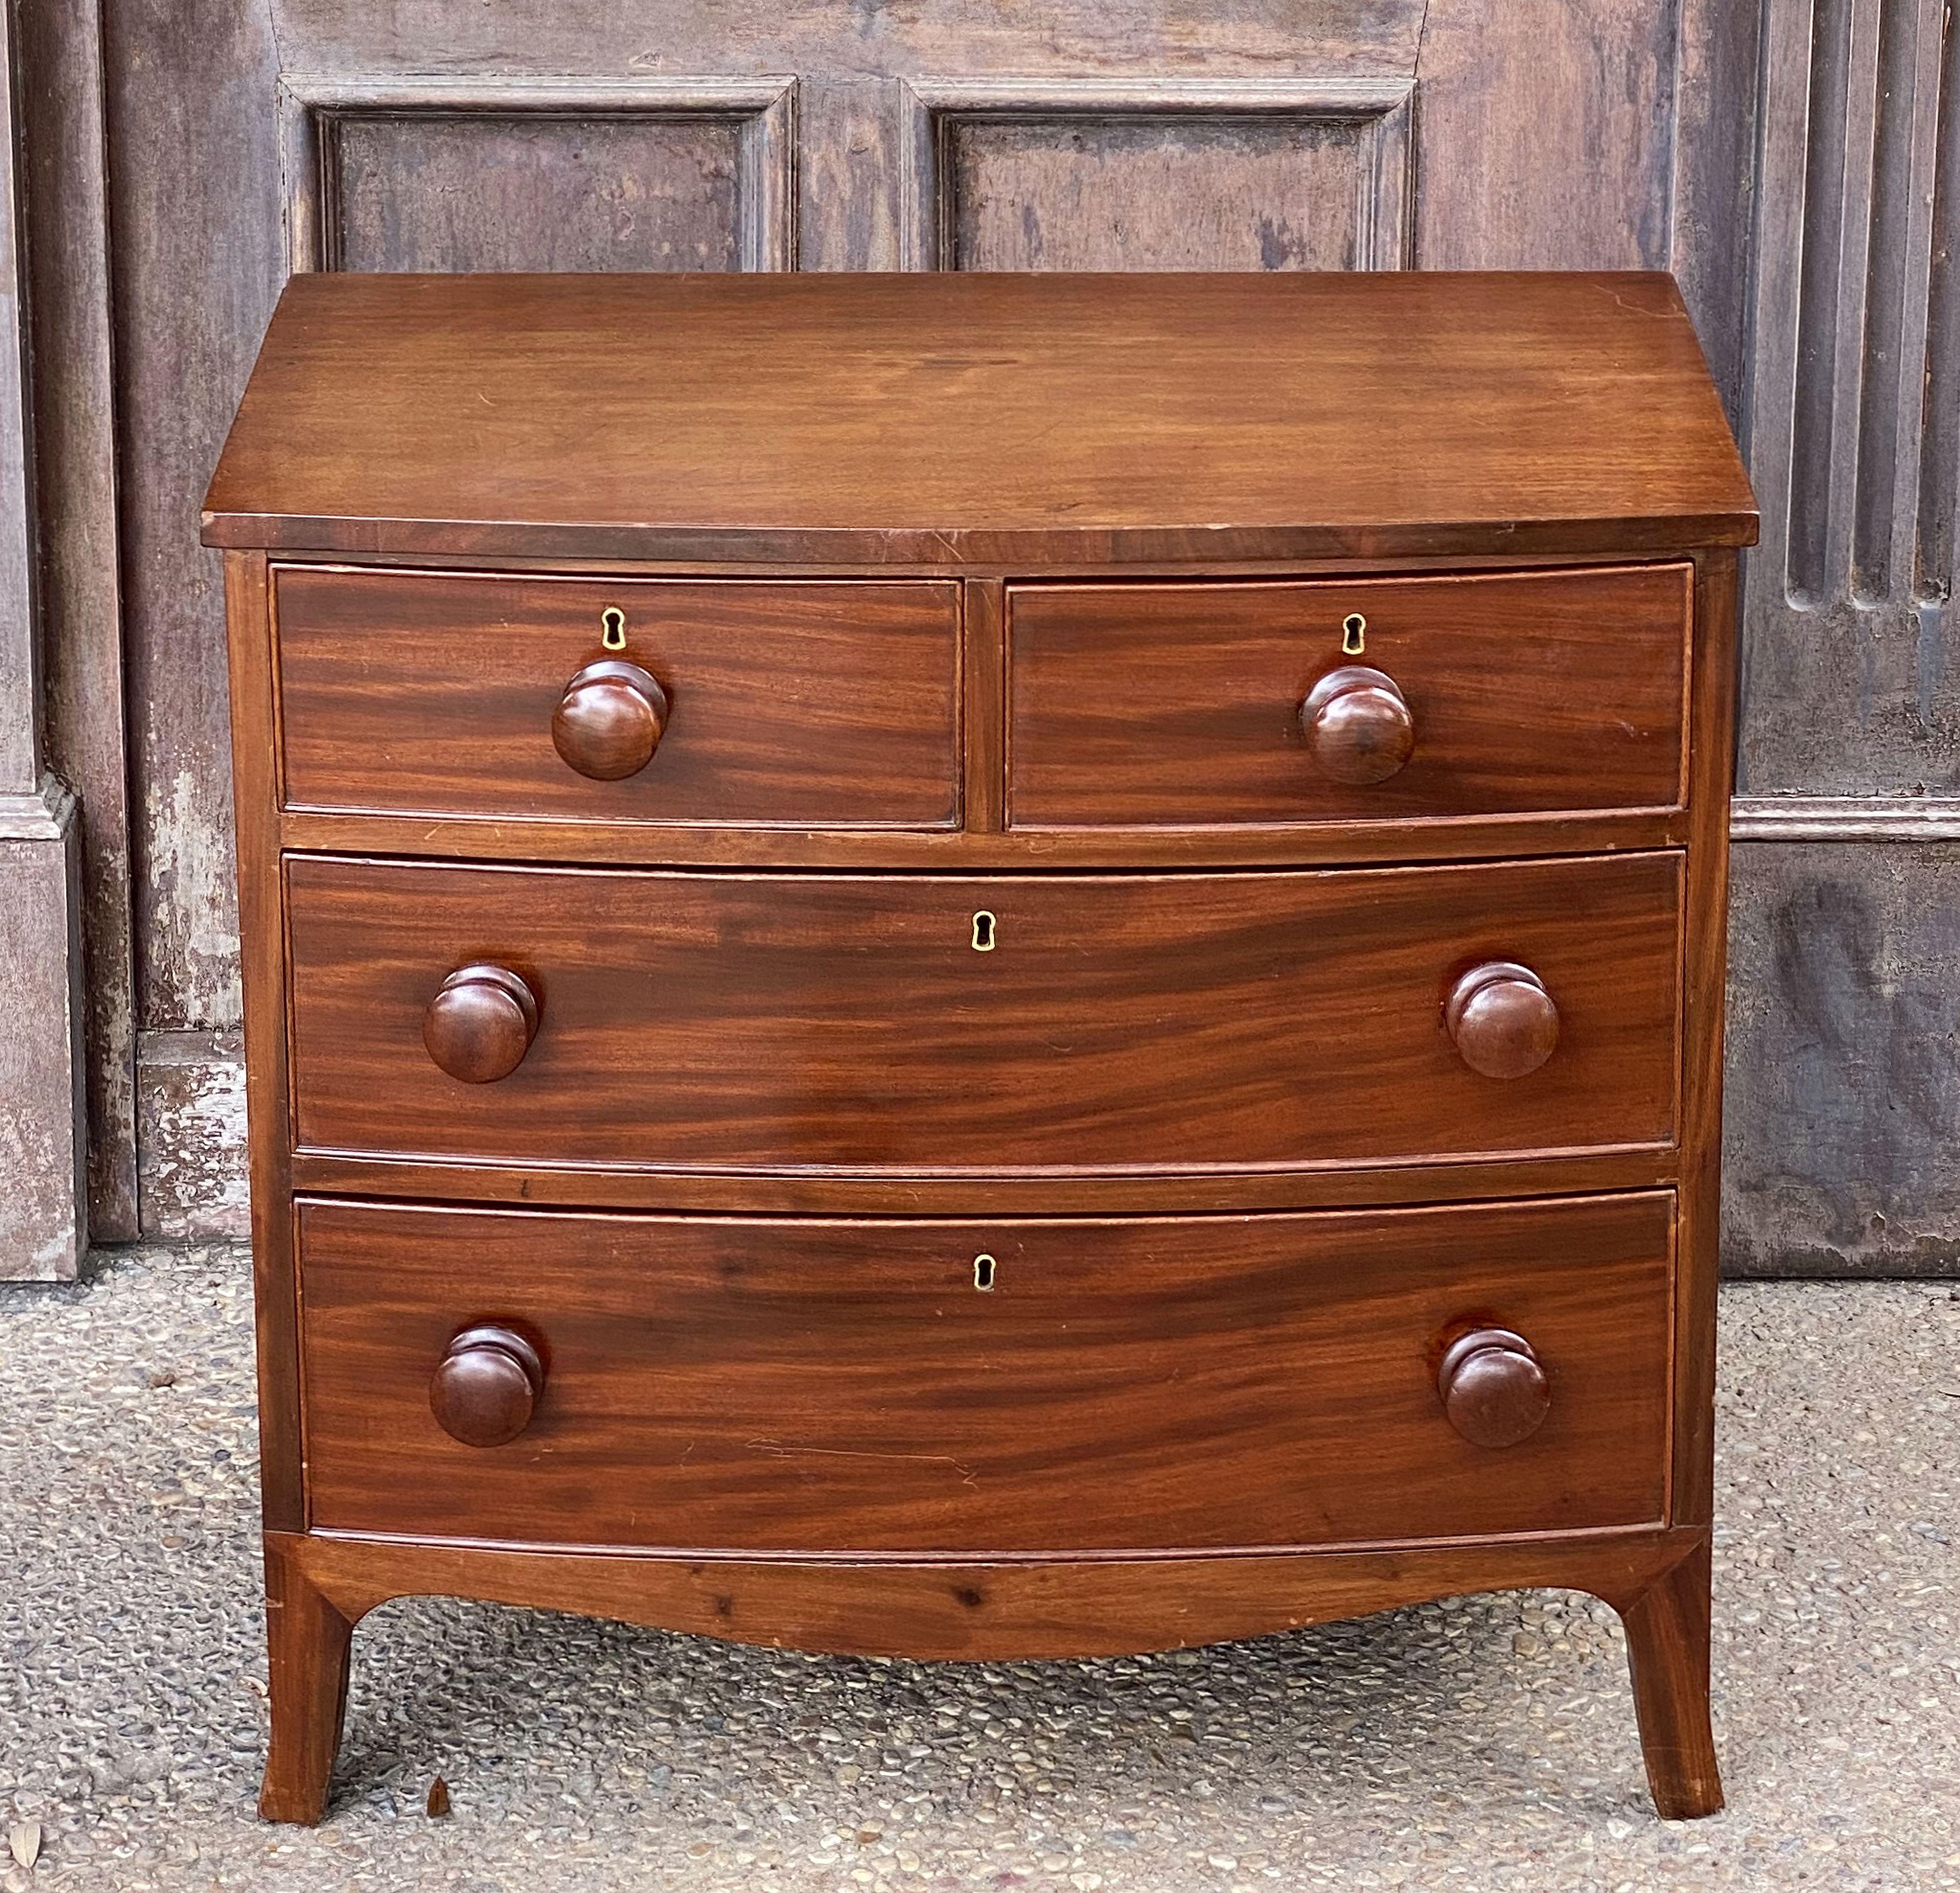 A handsome English bow-front small chest of drawers of mahogany from the 19th century - featuring a bowed top over a frieze of two small beaded drawers and two long beaded drawers, each drawer with fine mahogany veneers, knob pulls, and brass